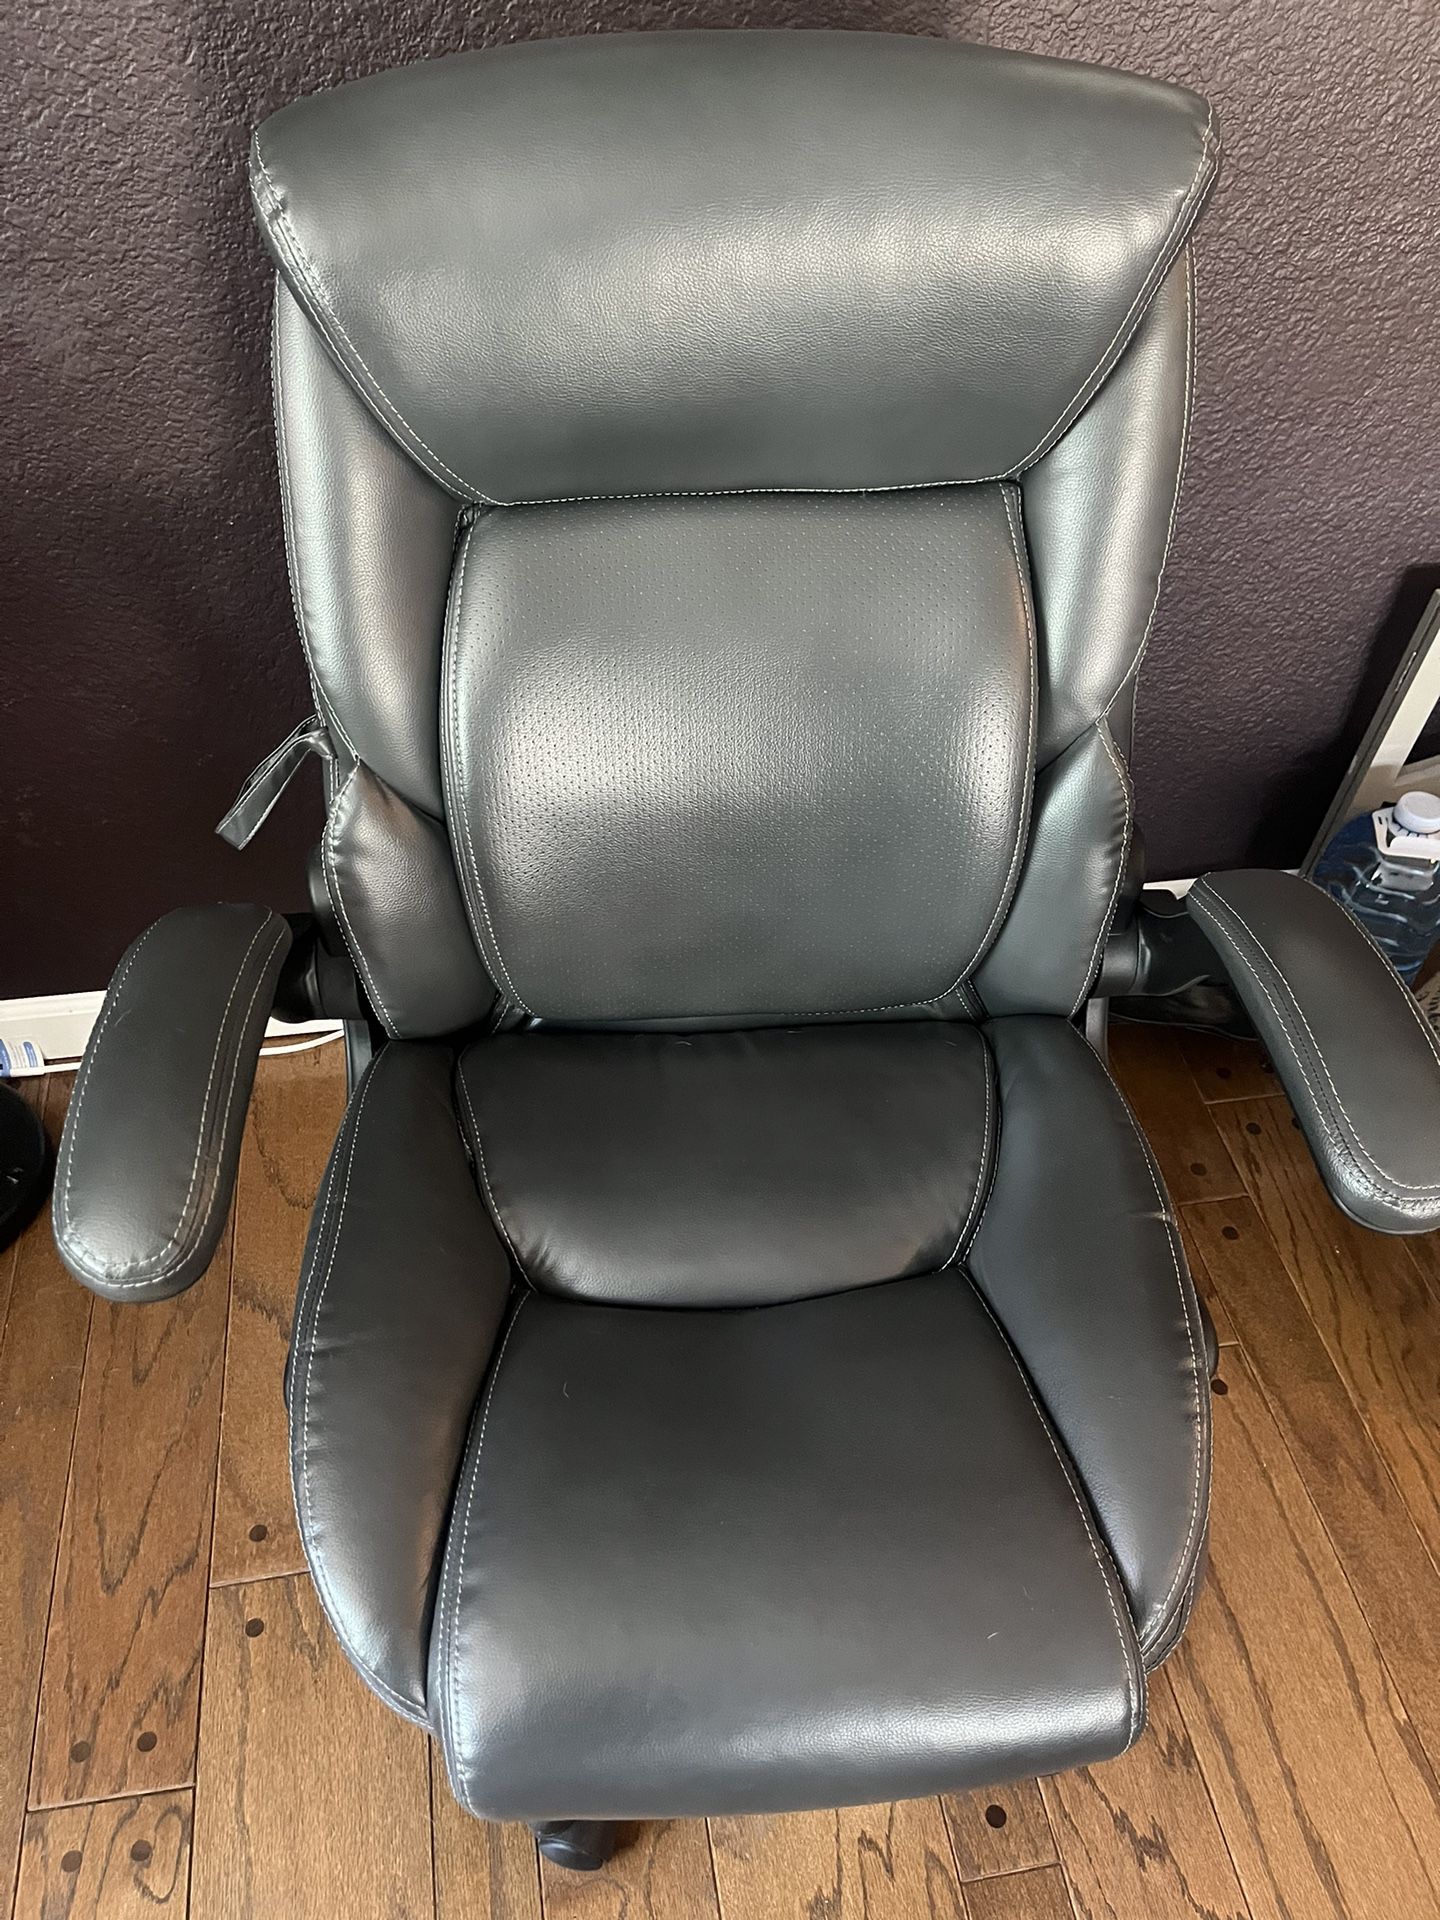 FREE OFFICE CHAIR 